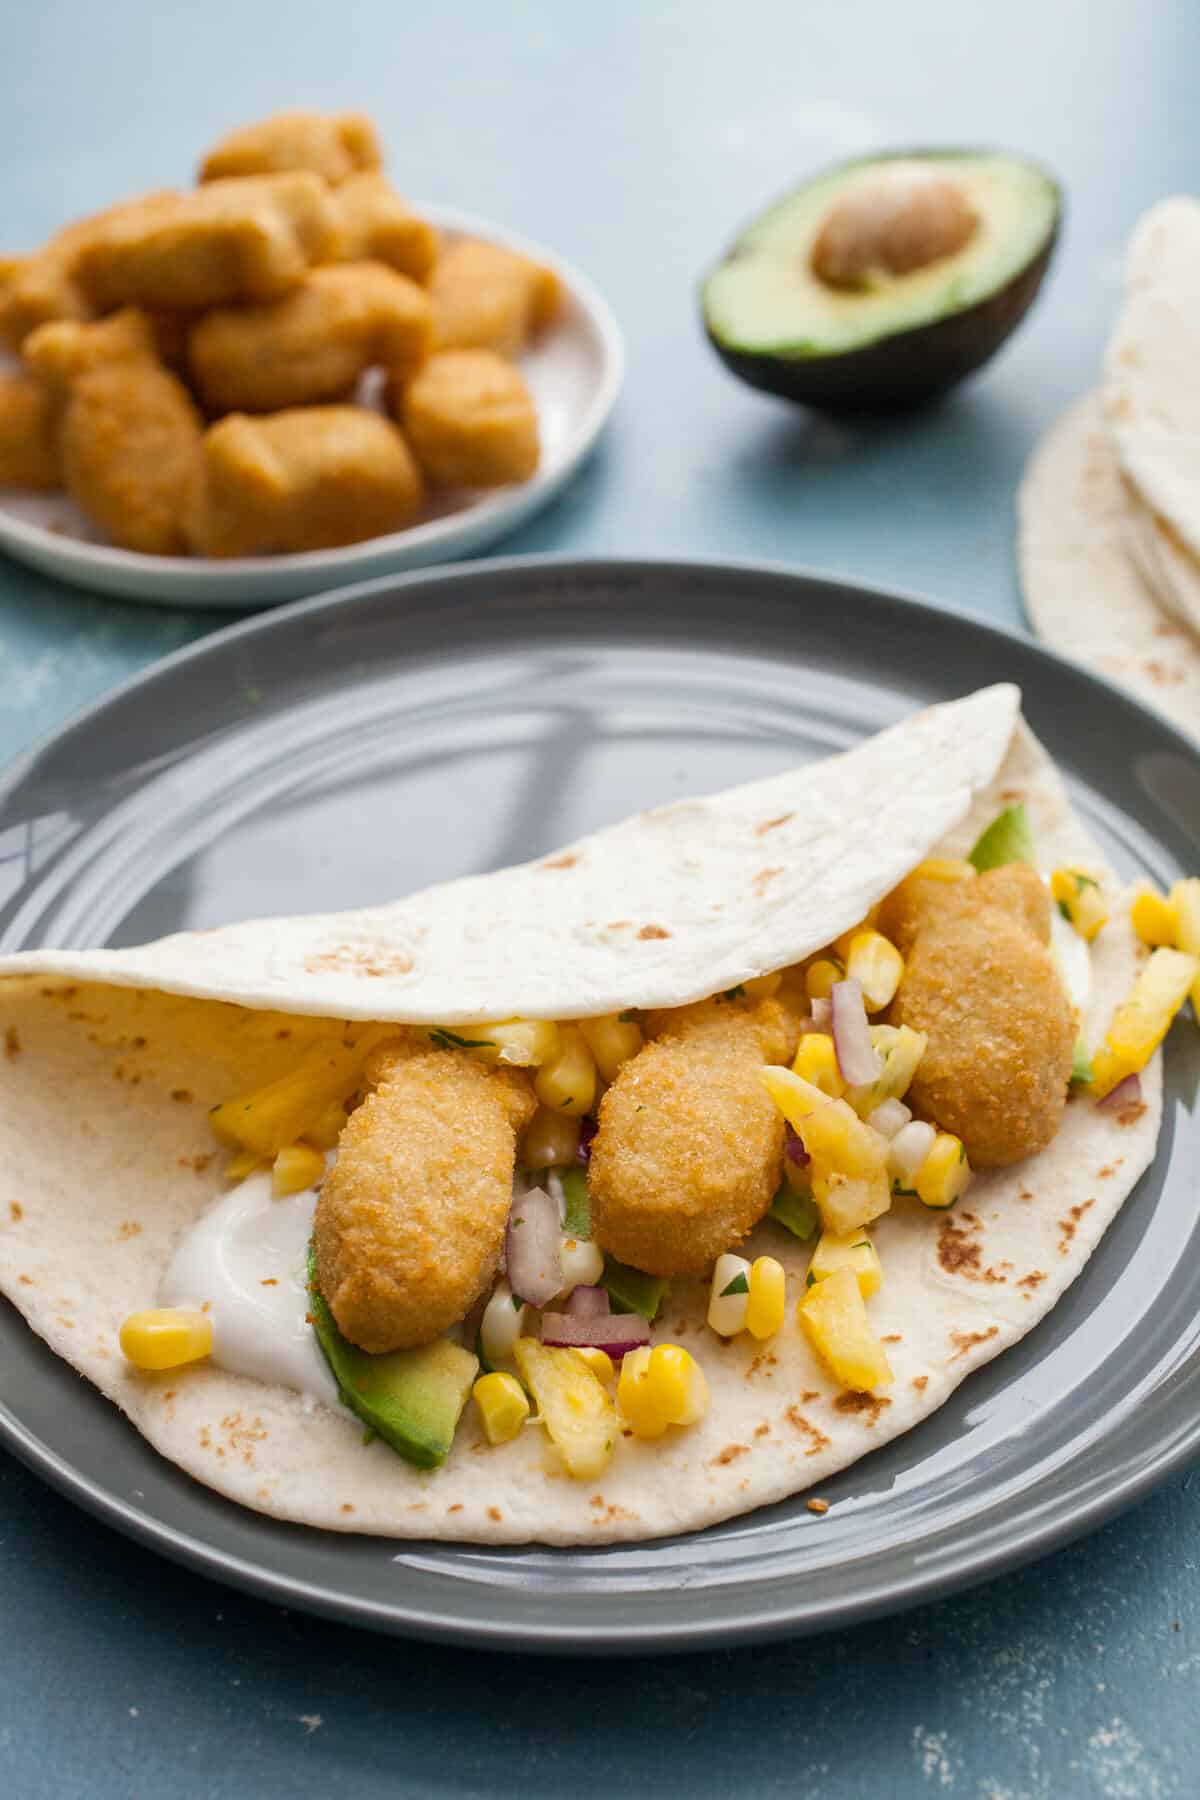 Kid Friendly Fish Tacos: These delicious fish tacos are easy to make and a simple way to get a healthy dinner on the table that kids will LOVE. Adult-approved as well! | macheesmo.com